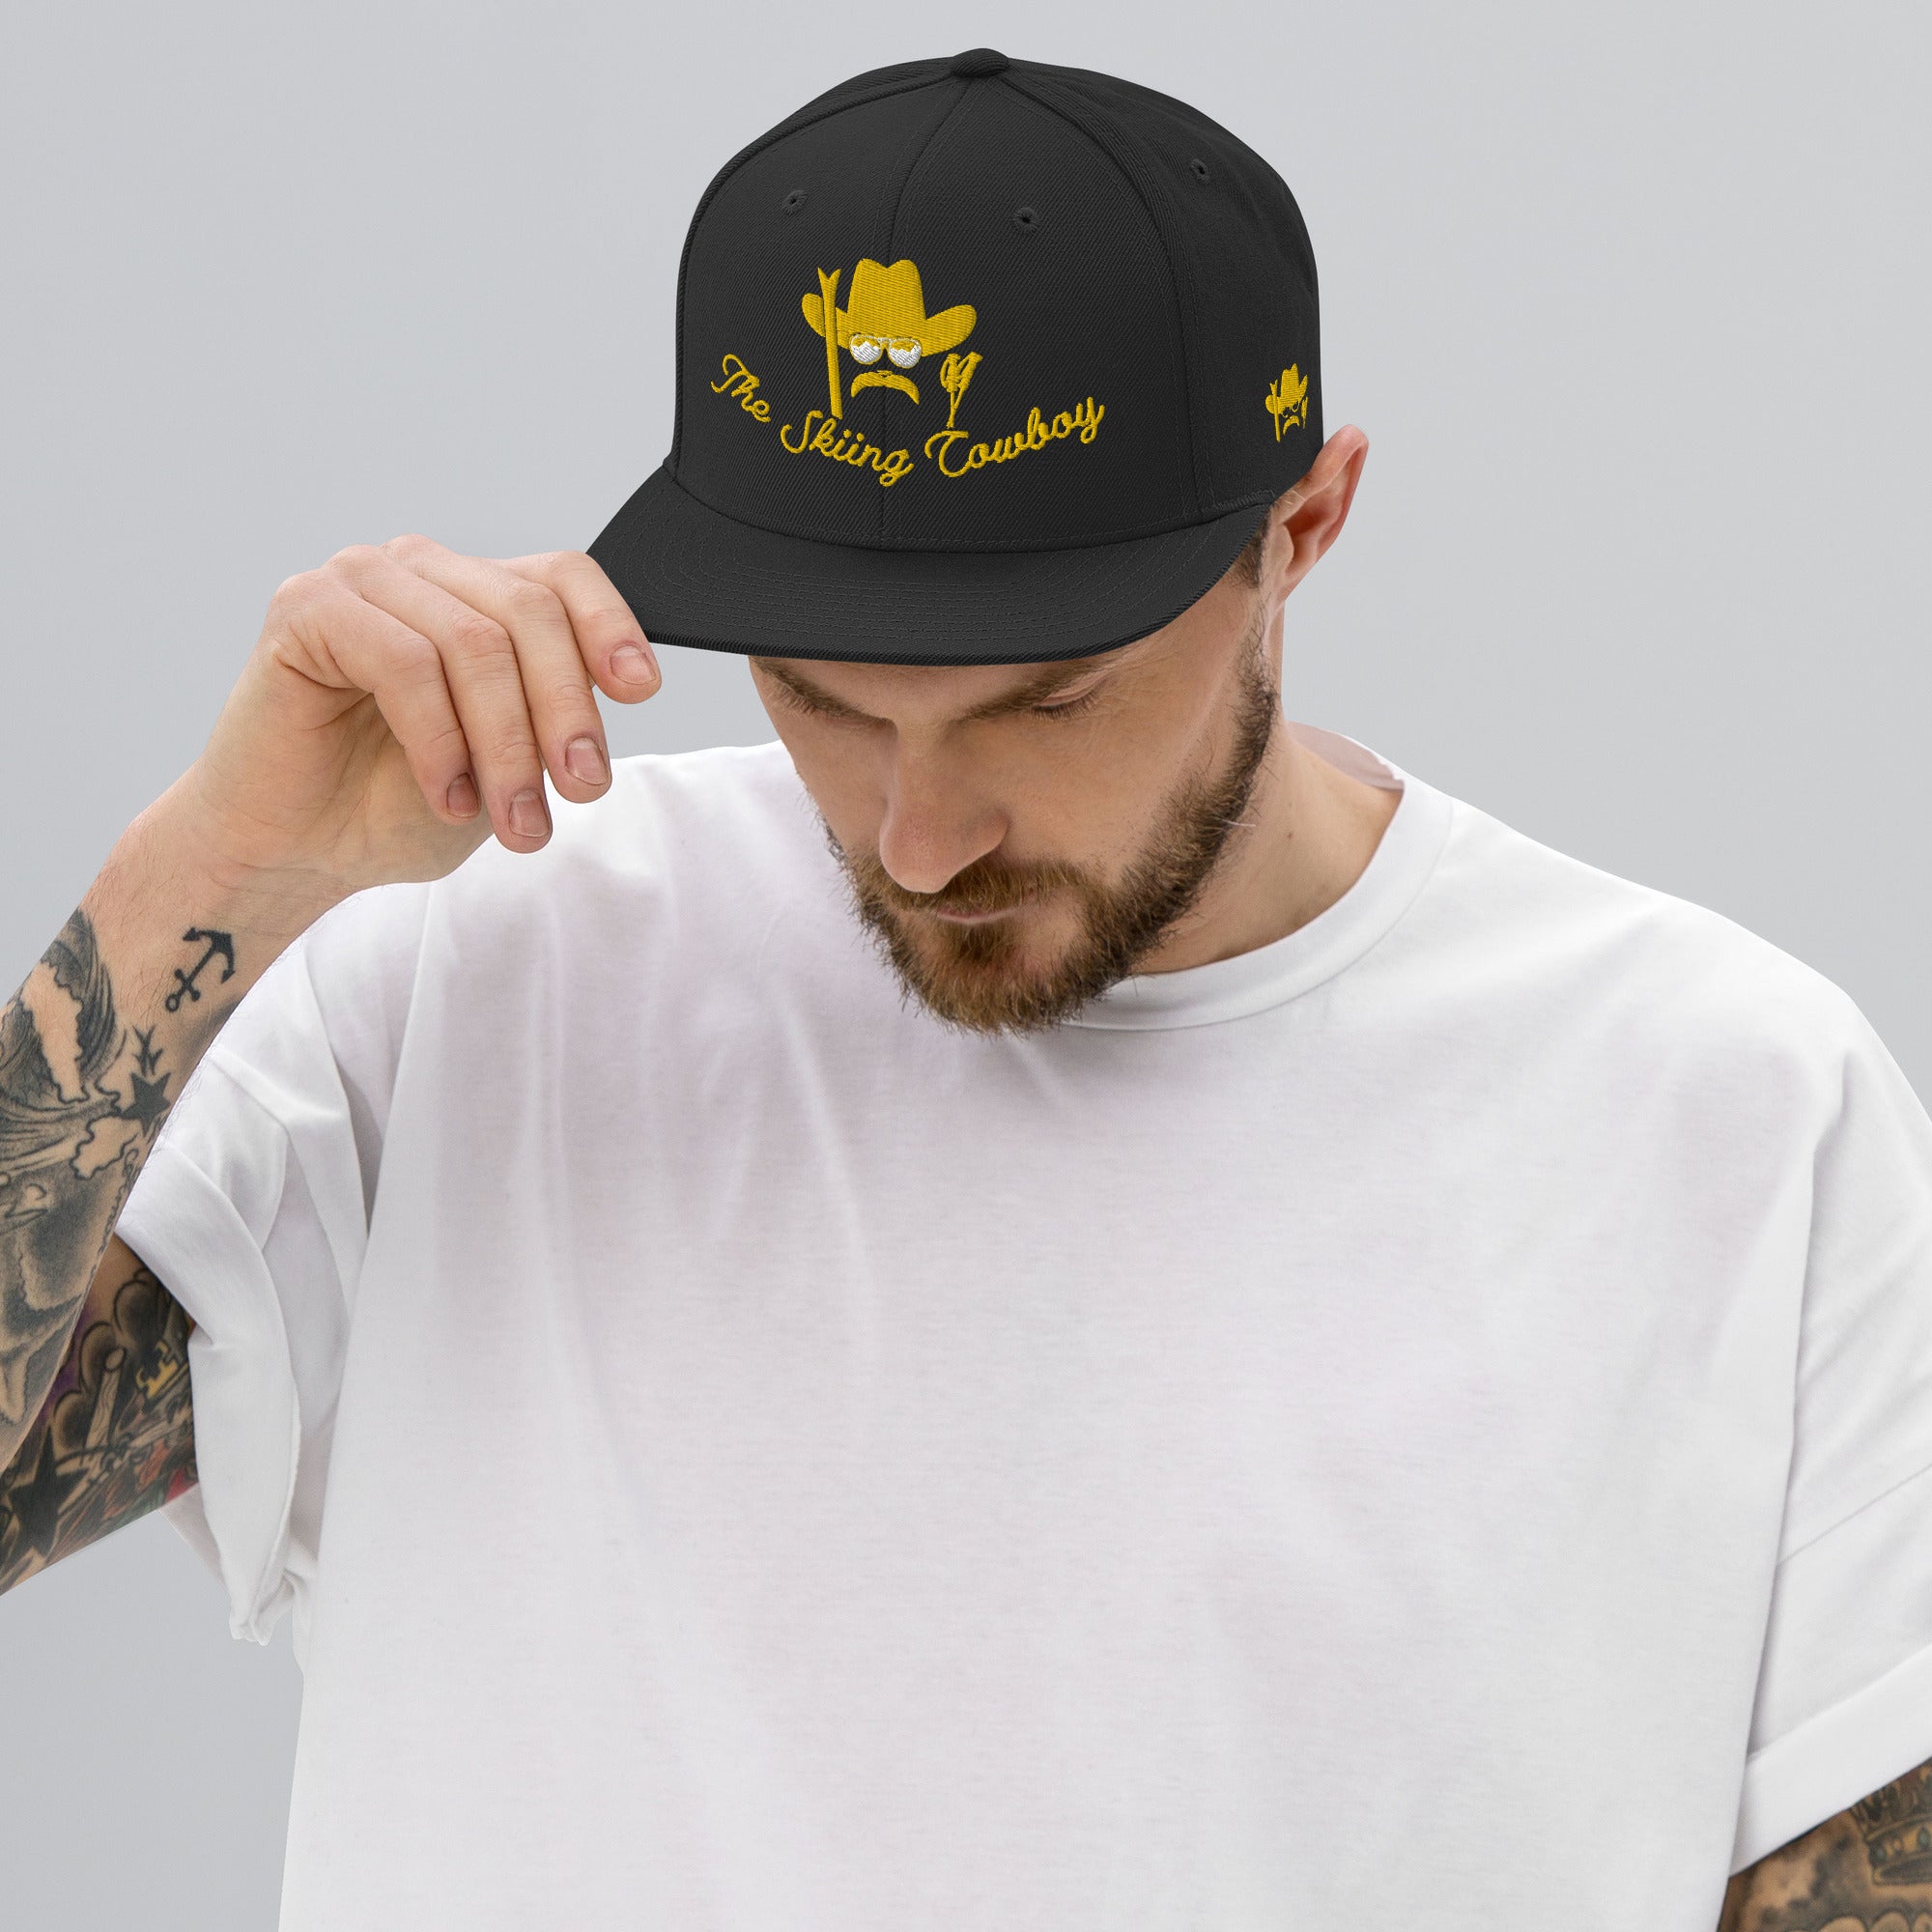 Snapback Wool Blend Cap The Skiing Cowboy Gold embroidered pattern (3 sides)